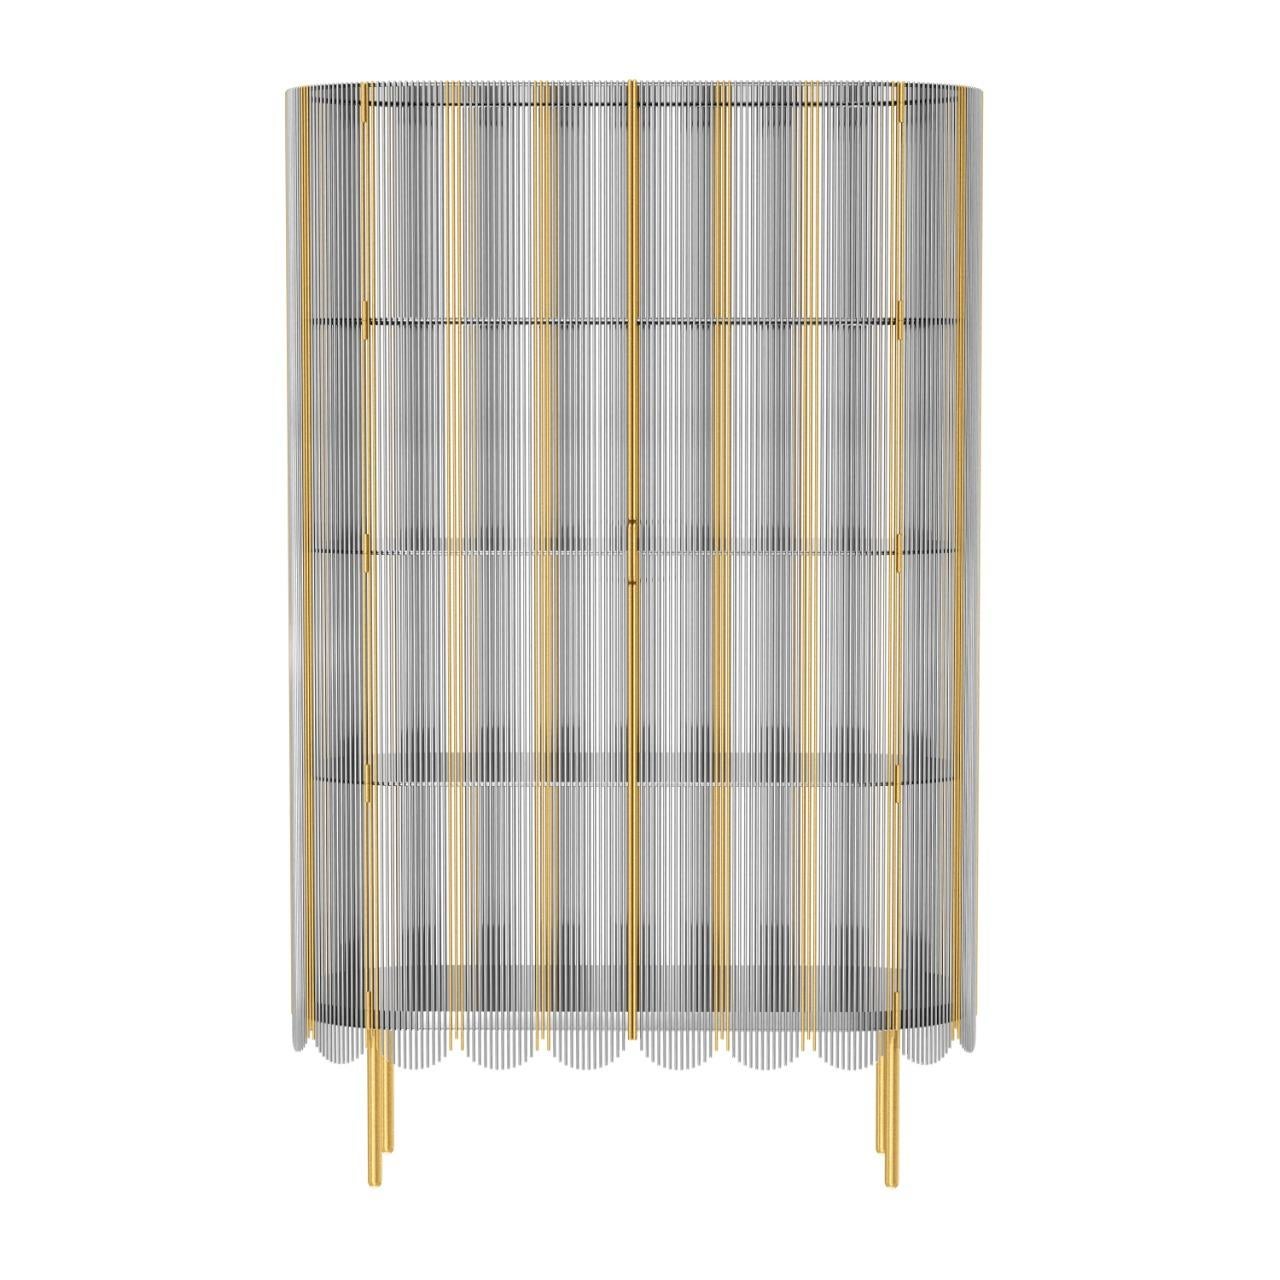 Strings Storage Cabinet Silver Gold by Nika Zupanc is a tall metal cabinet made of multiple steel 